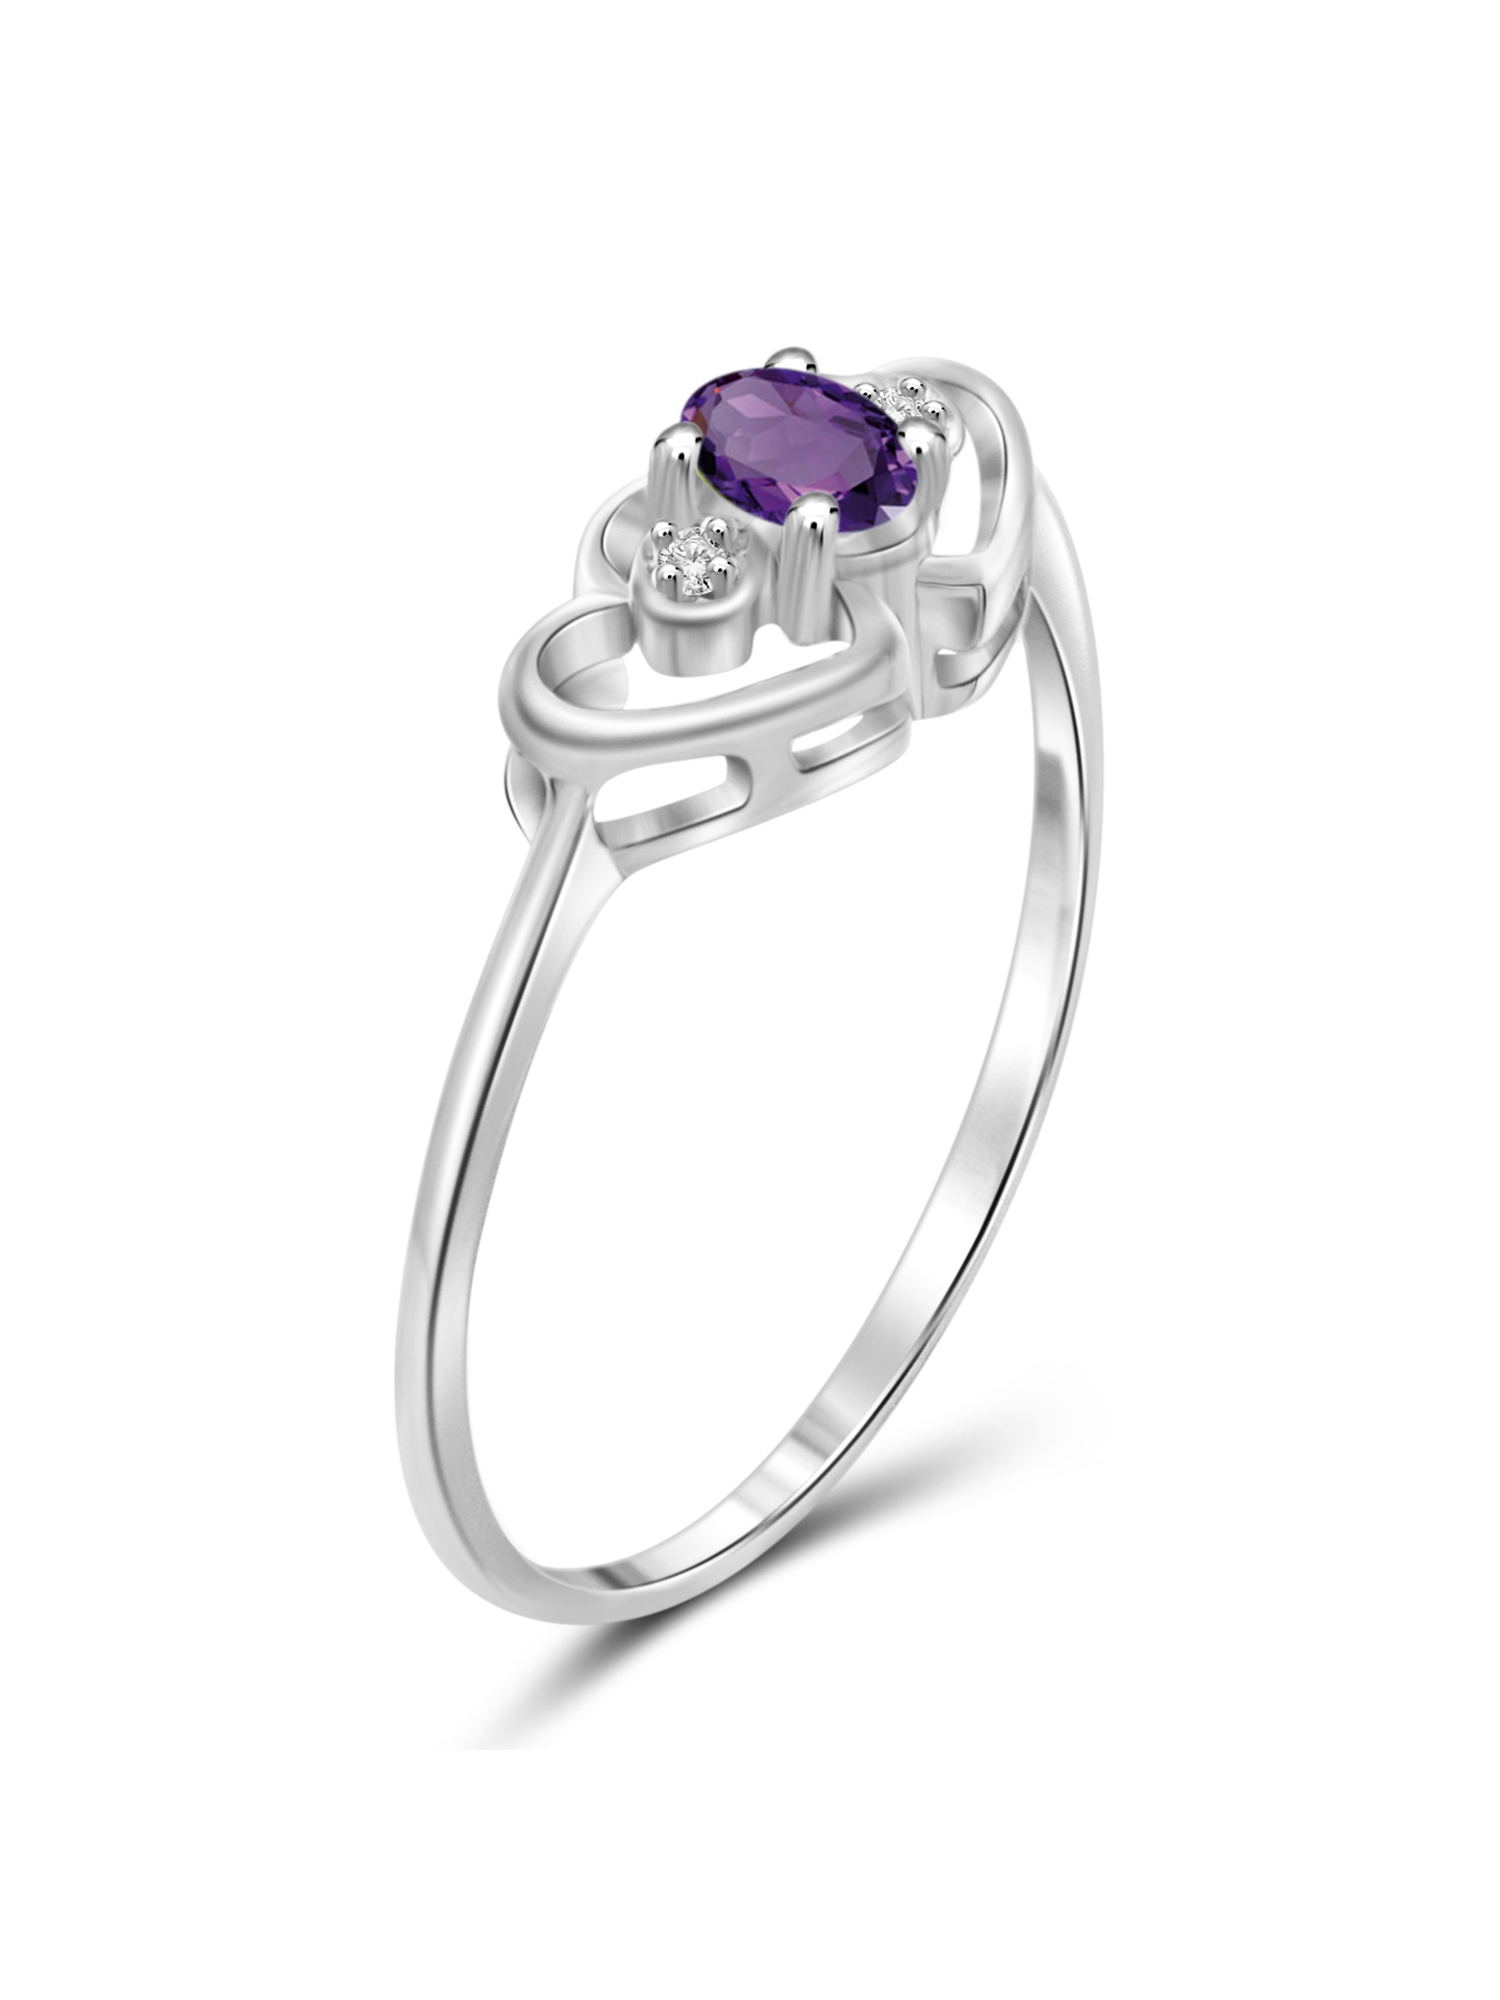 JewelersClub Amethyst Ring Birthstone Jewelry – 0.15 Carat Amethyst 0.925 Sterling Silver Ring Jewelry with White Diamond Accent – Gemstone Rings with Hypoallergenic 0.925 Sterling Silver Band - image 4 of 4